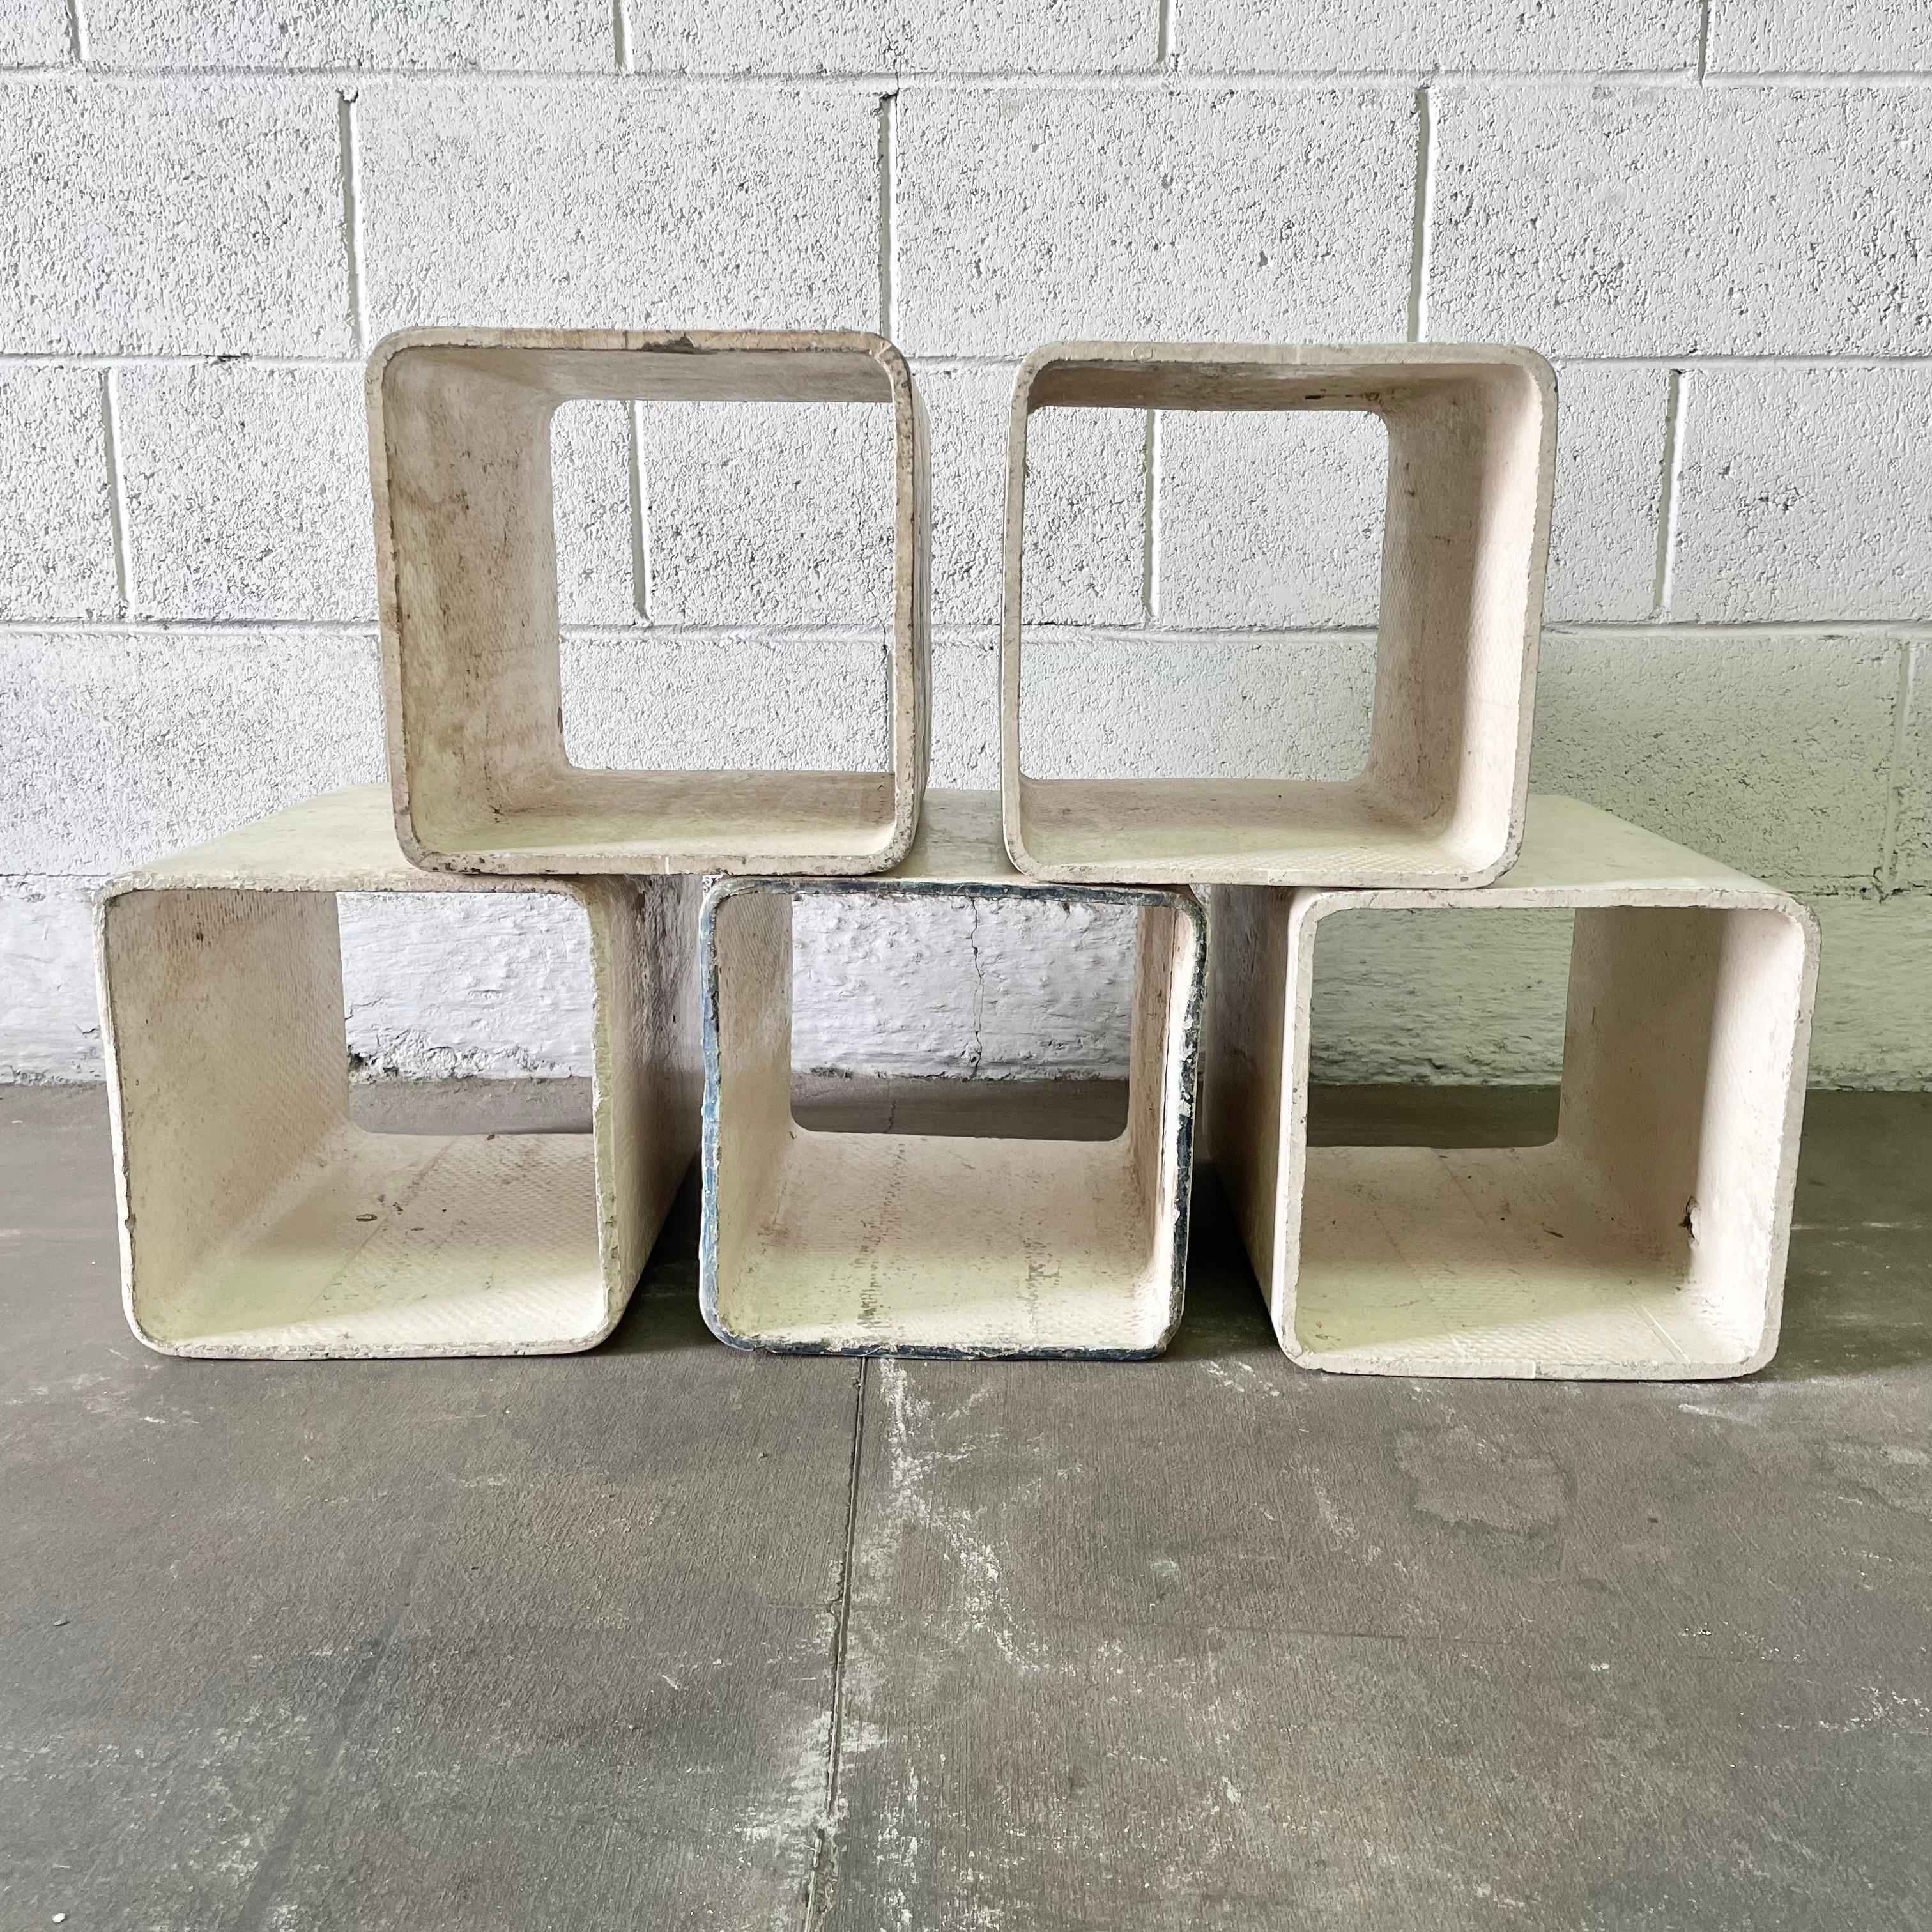 Great set of concrete cubes painted in cream. Designed by Swiss architect and designer Willy Guhl. Handmade in the early 1960s in Switzerland. Produced by Eternit. Set of 5 cubes in great original condition. Can be arranged in a multitude of ways.